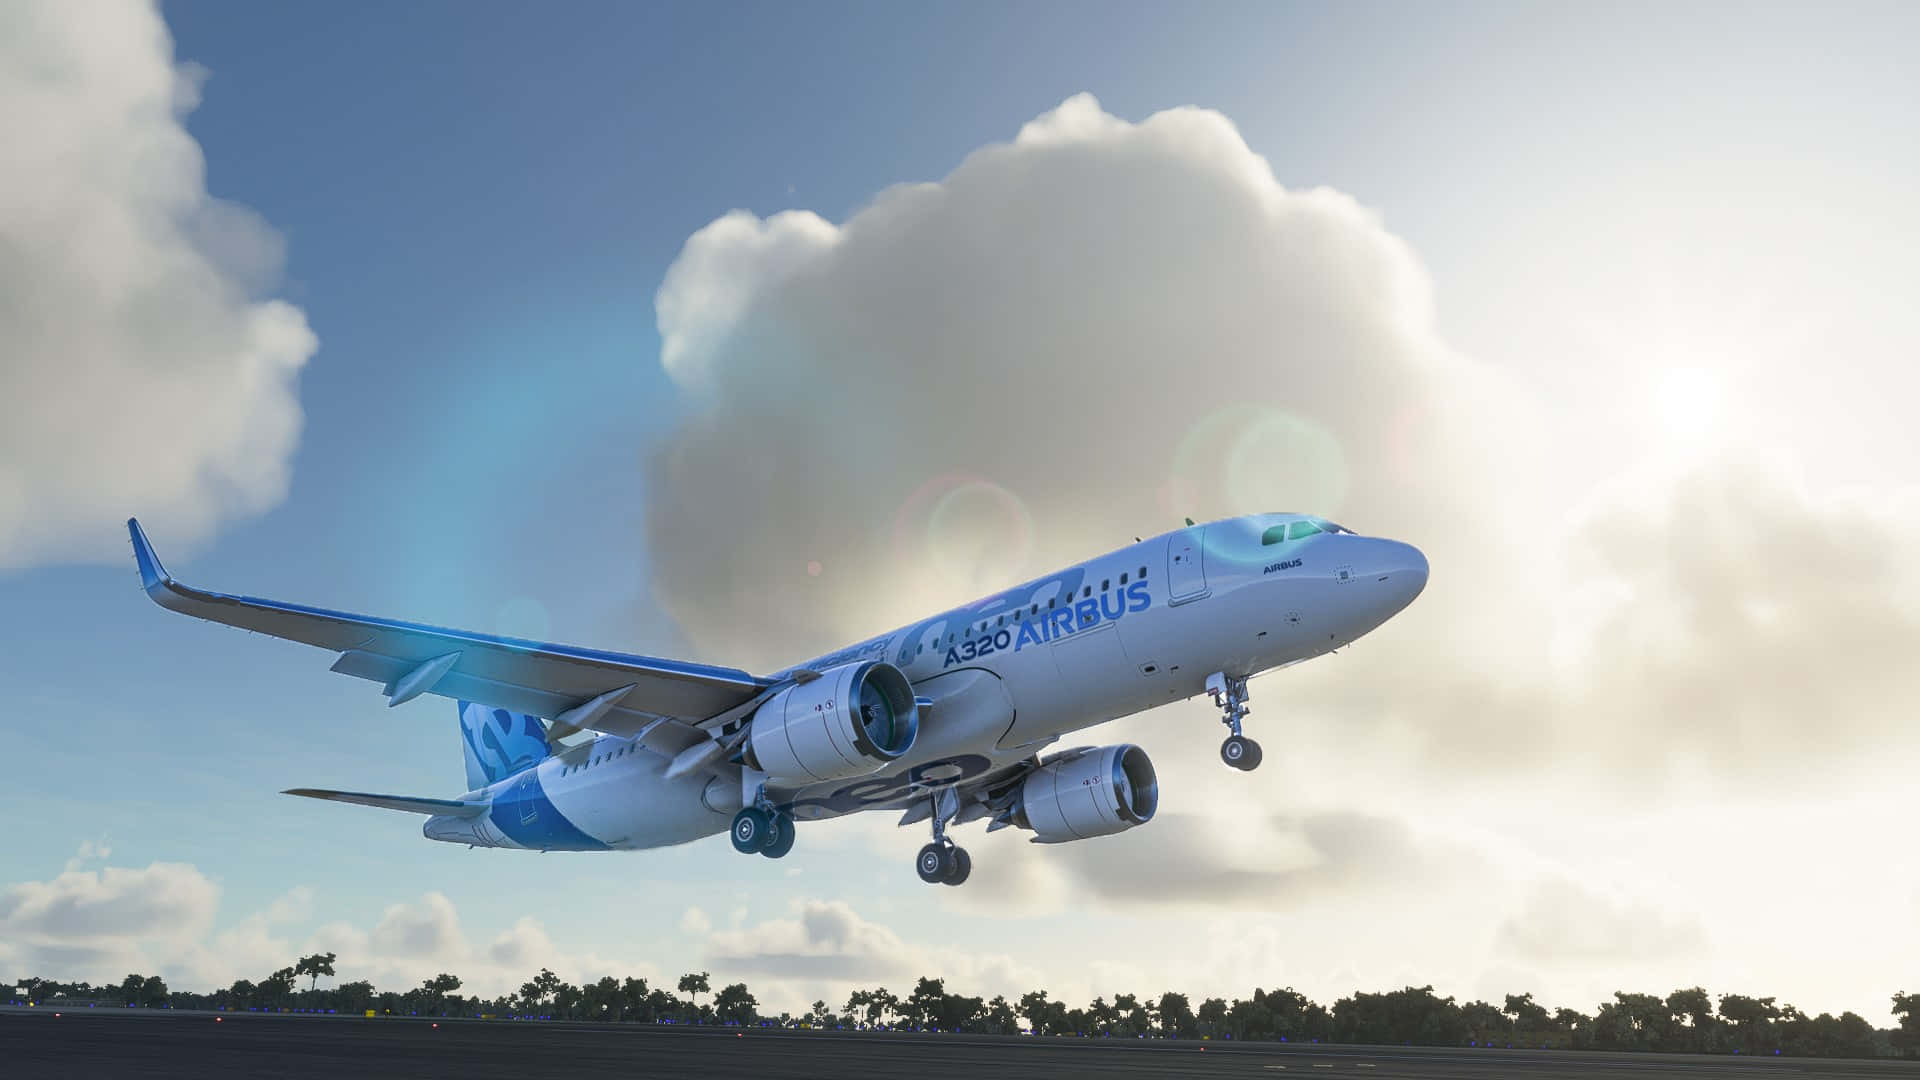 Explore the Skies with the newest Microsoft Flight Simulator.